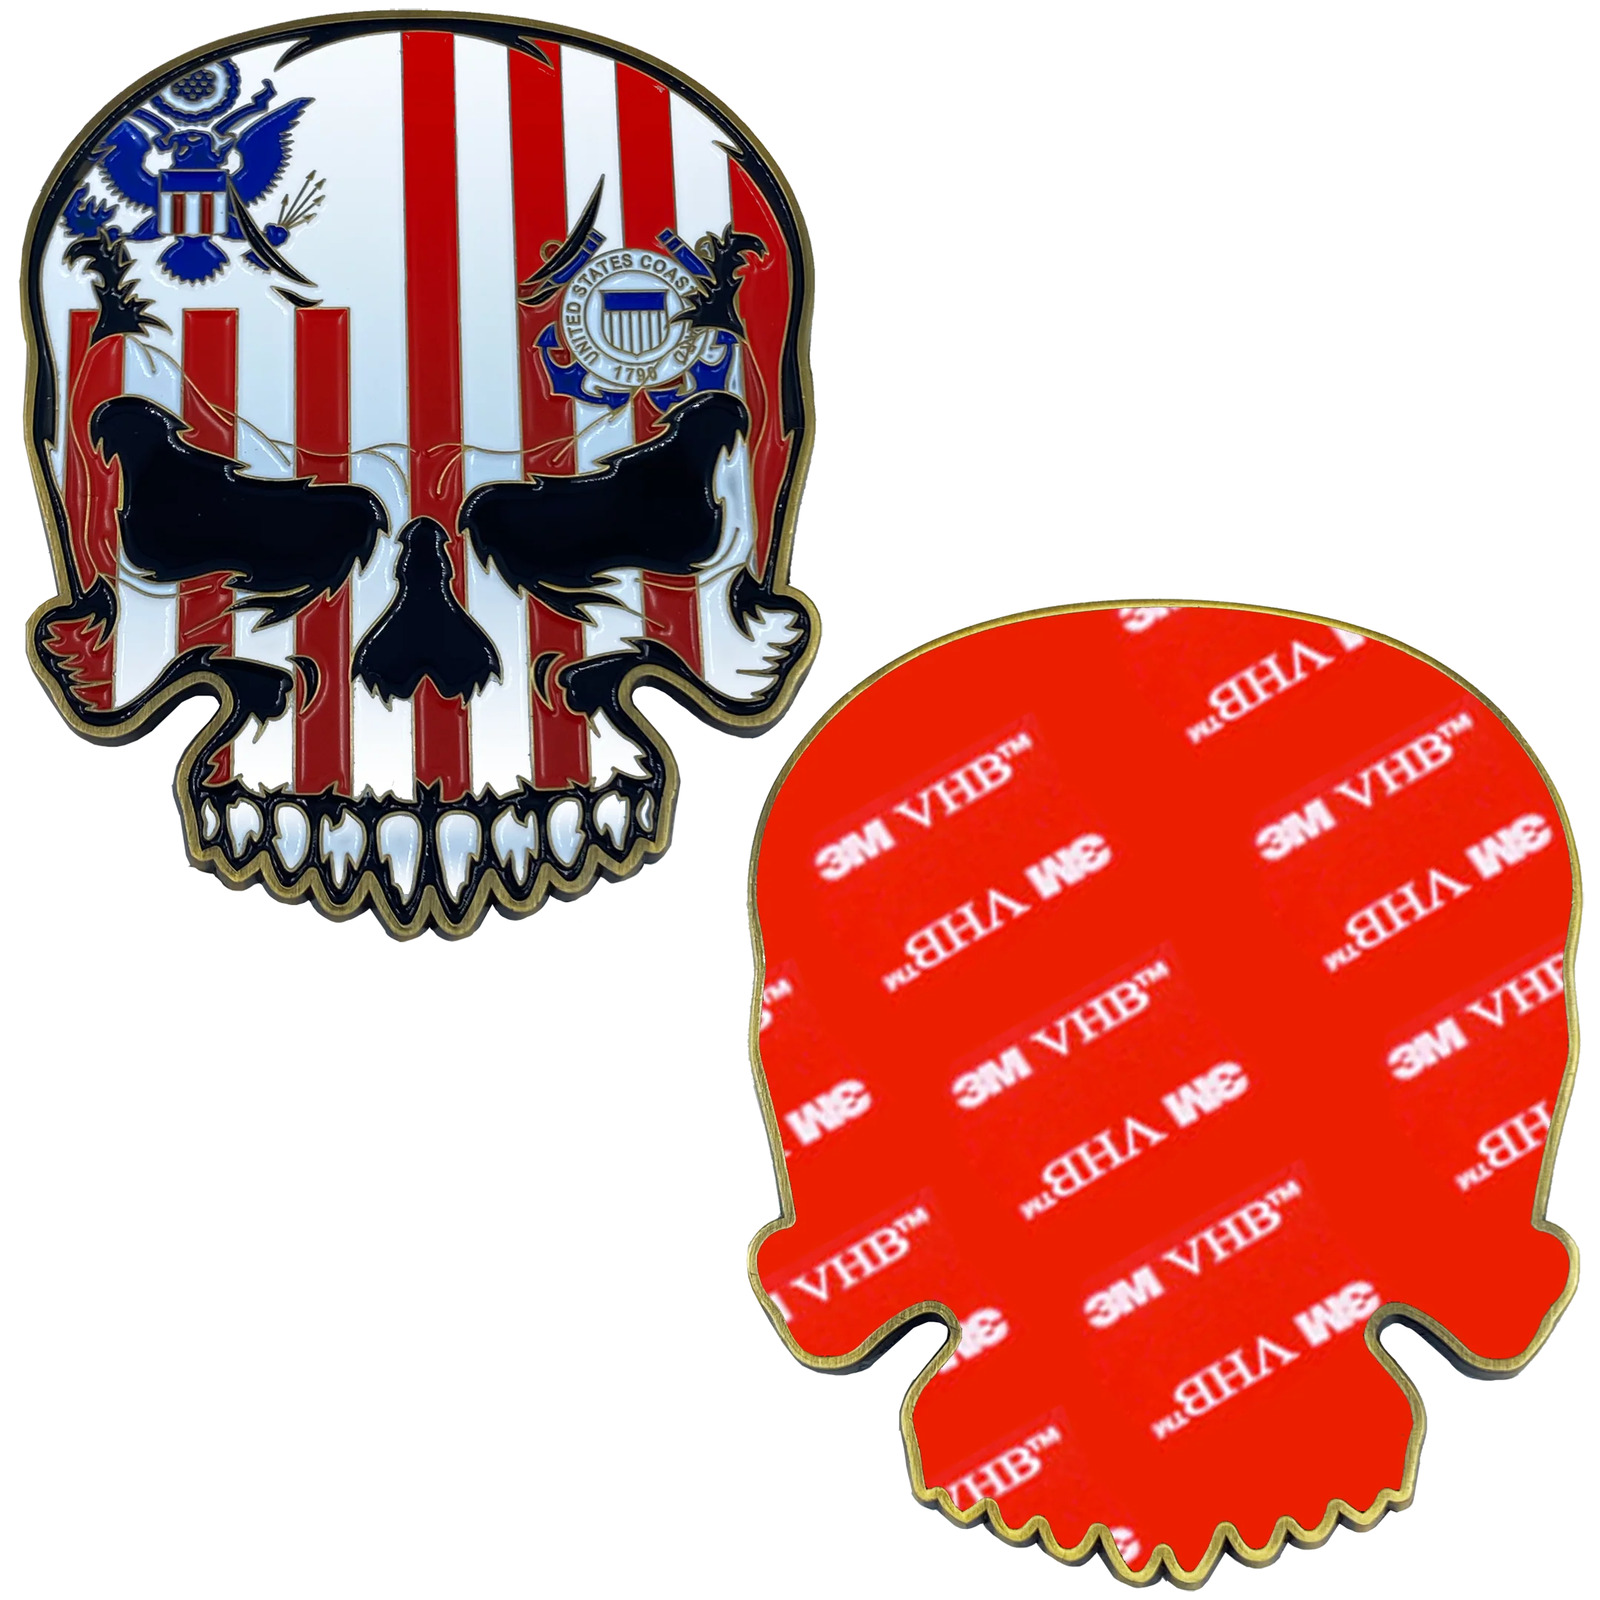 CL-GG US Coast Guard Flag 3M adhesive Coastie Skull Challenge Coin for vehicle b